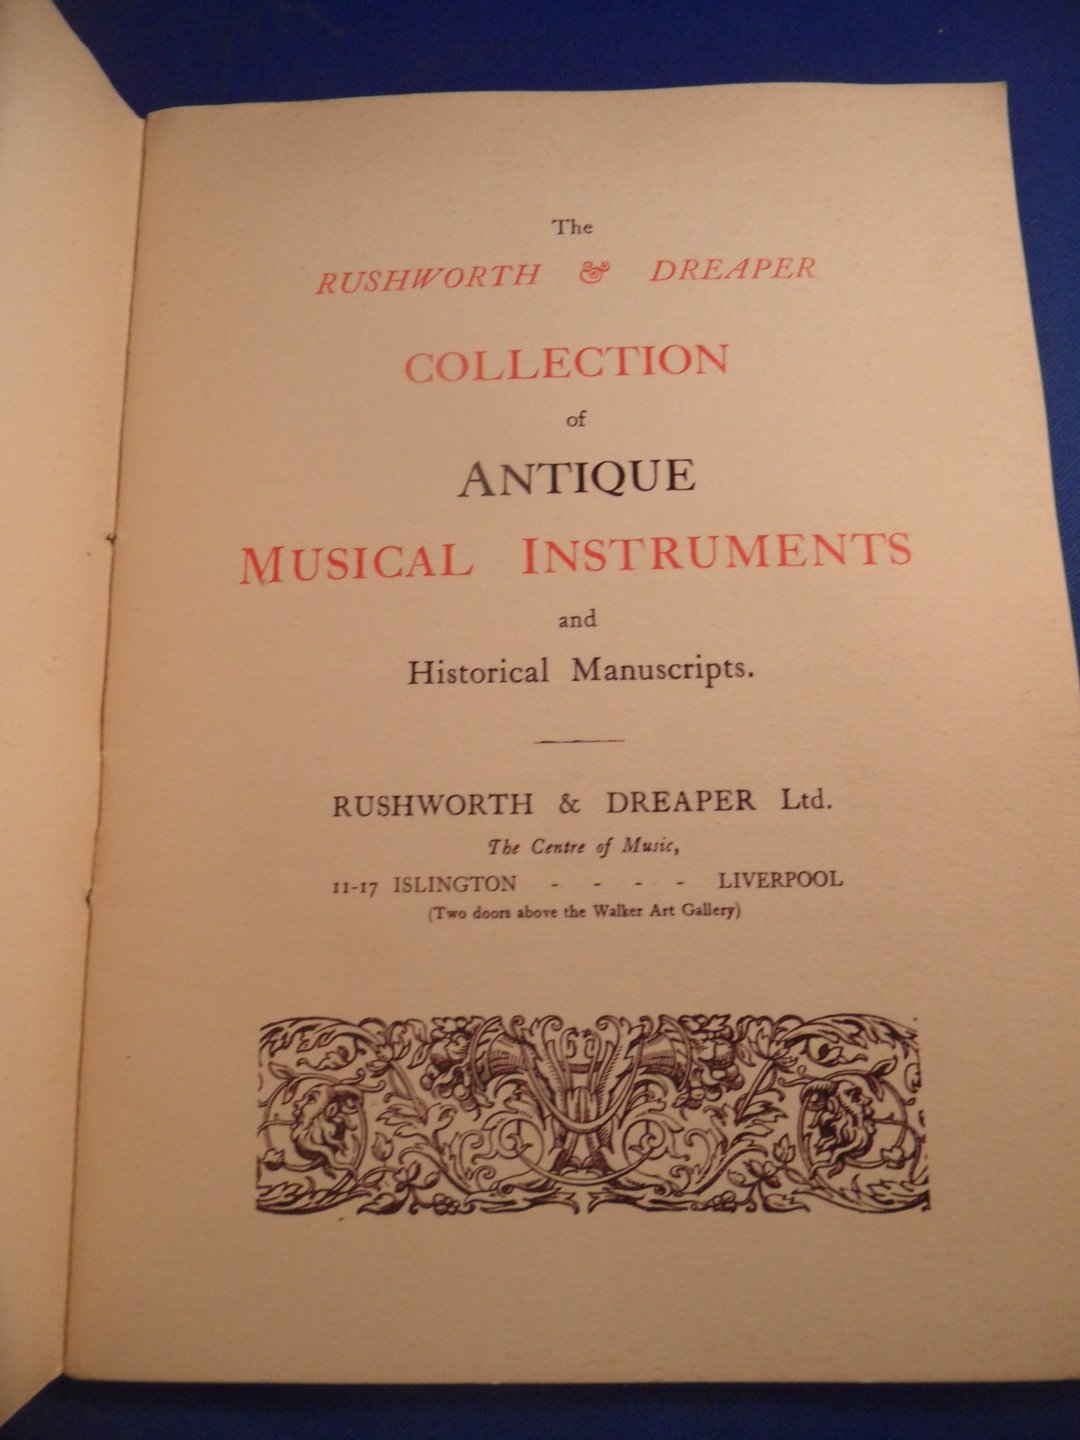  - The Rushworth & Dreaper Collection of Antique Musical  Instruments and historical manuscripts